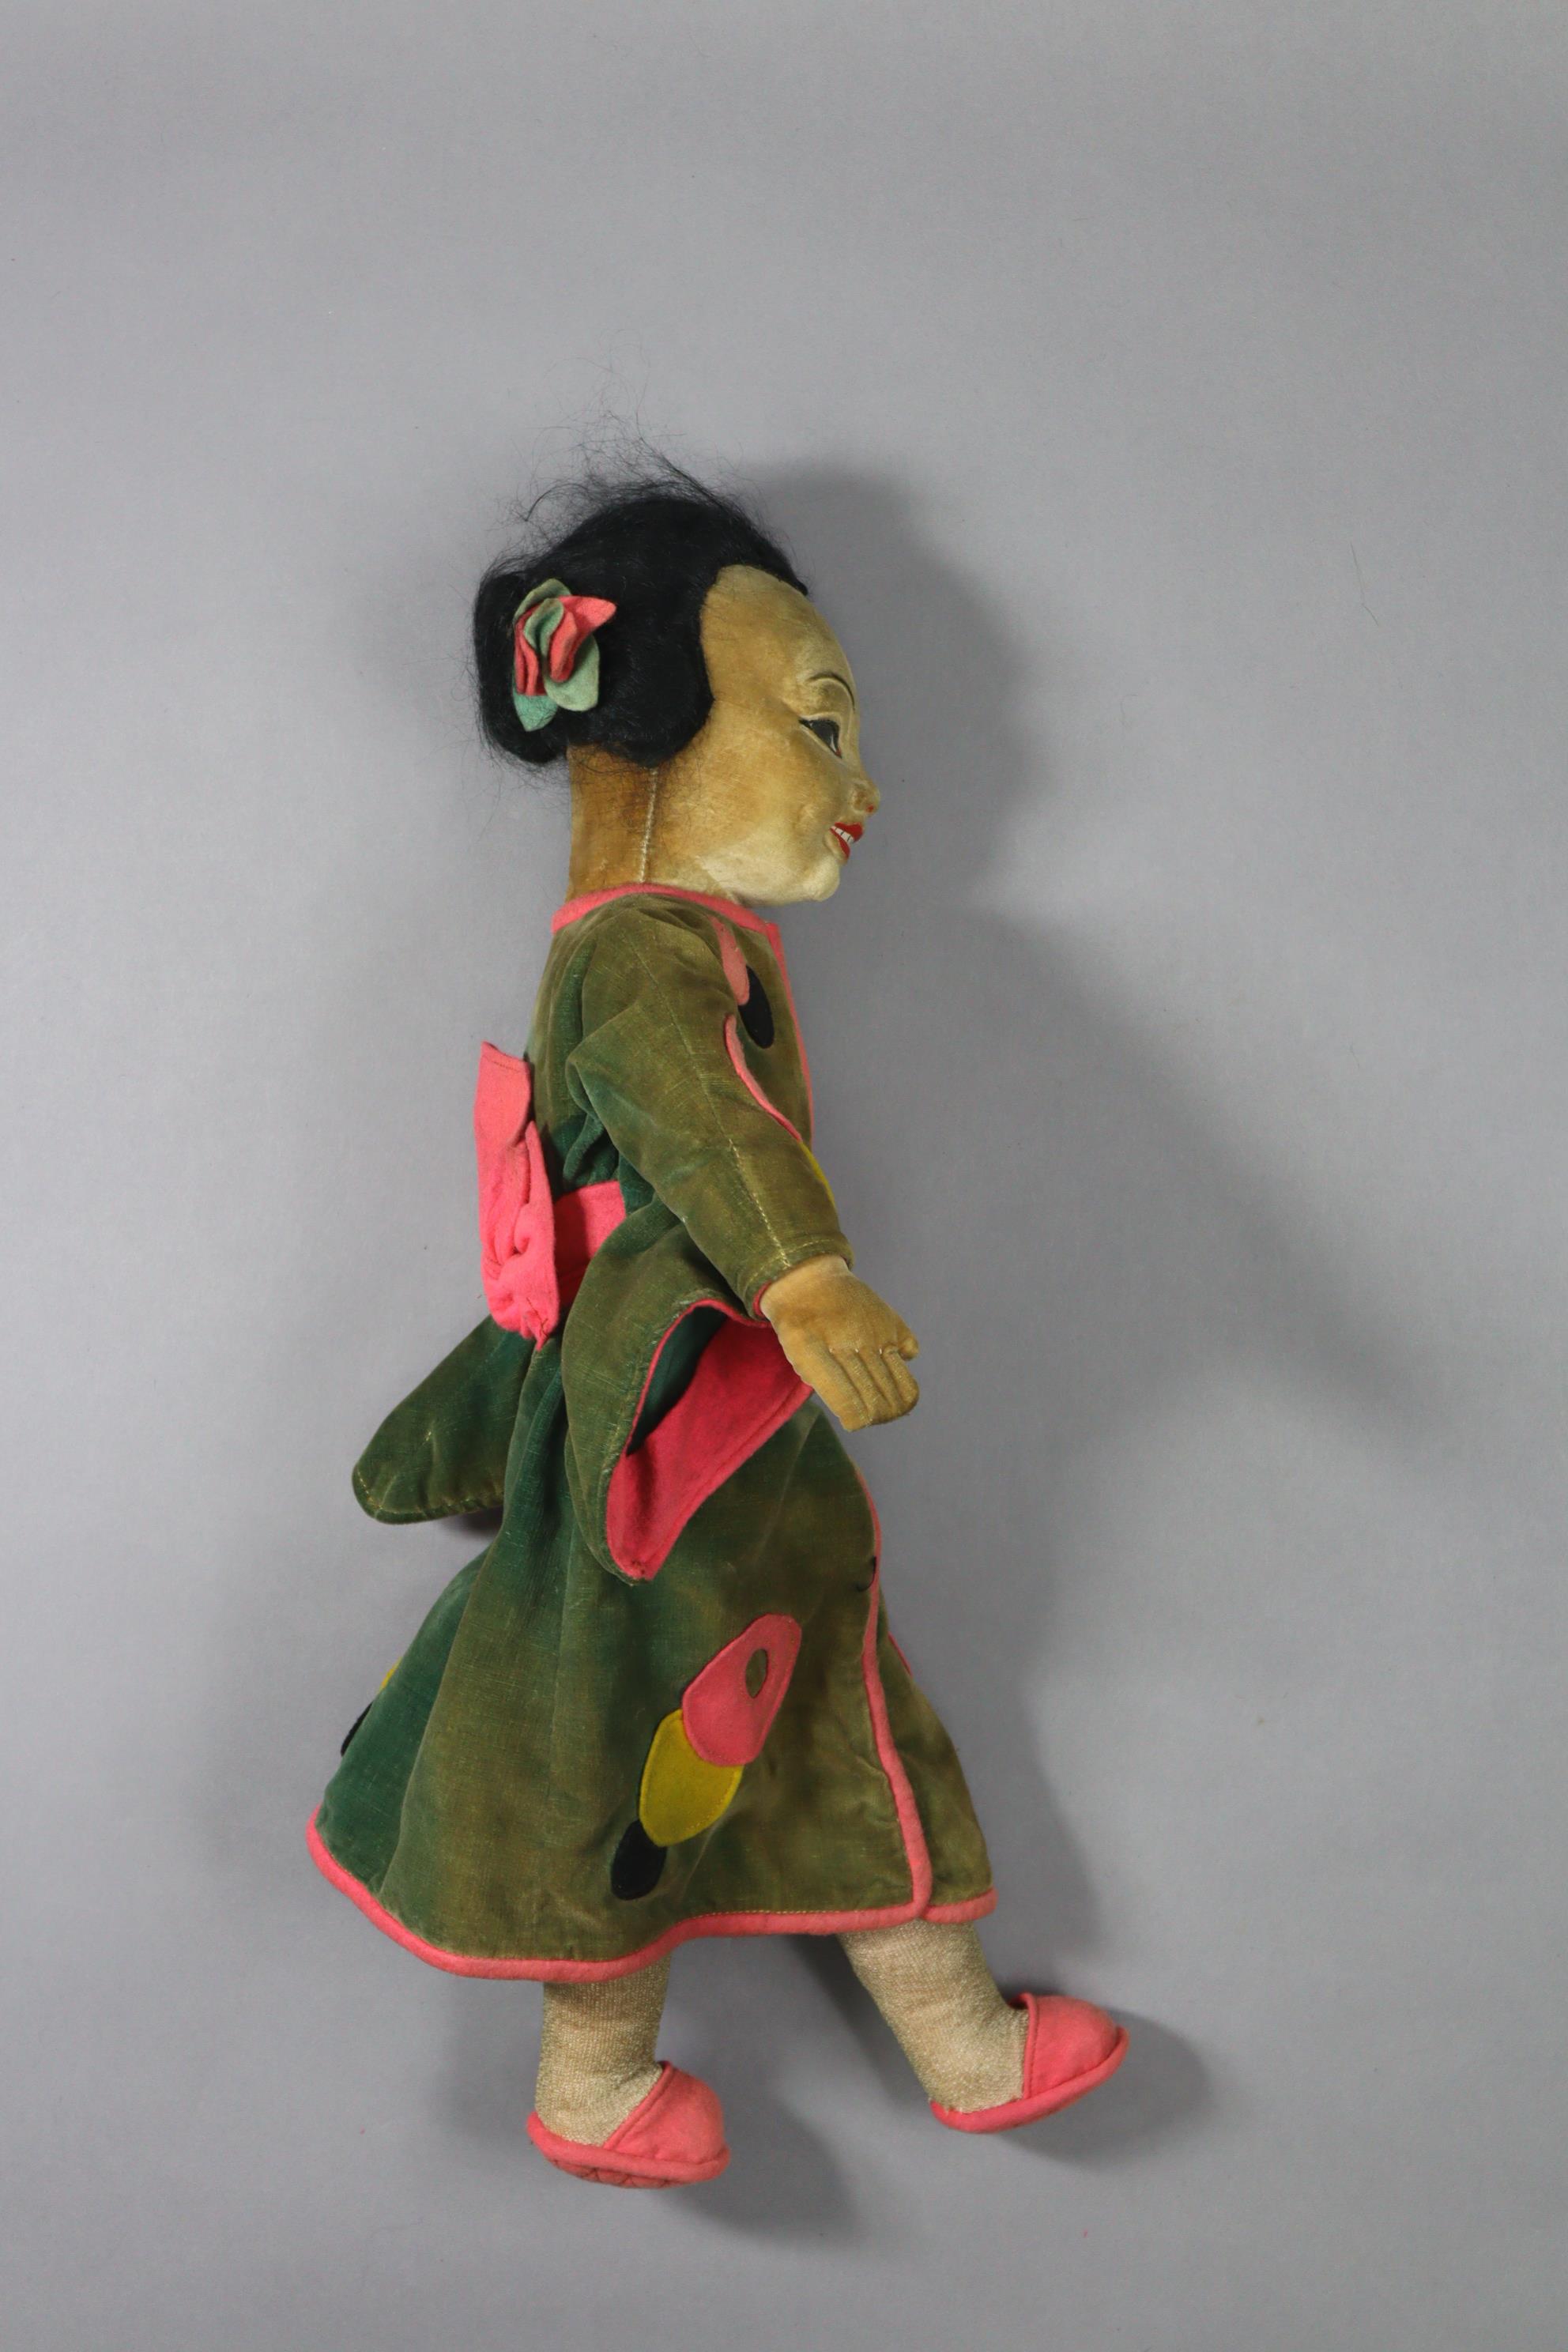 A VINTAGE LENCI-TYPE CHINESE GIRL CLOTH DOLL, 19” high. - Image 3 of 3